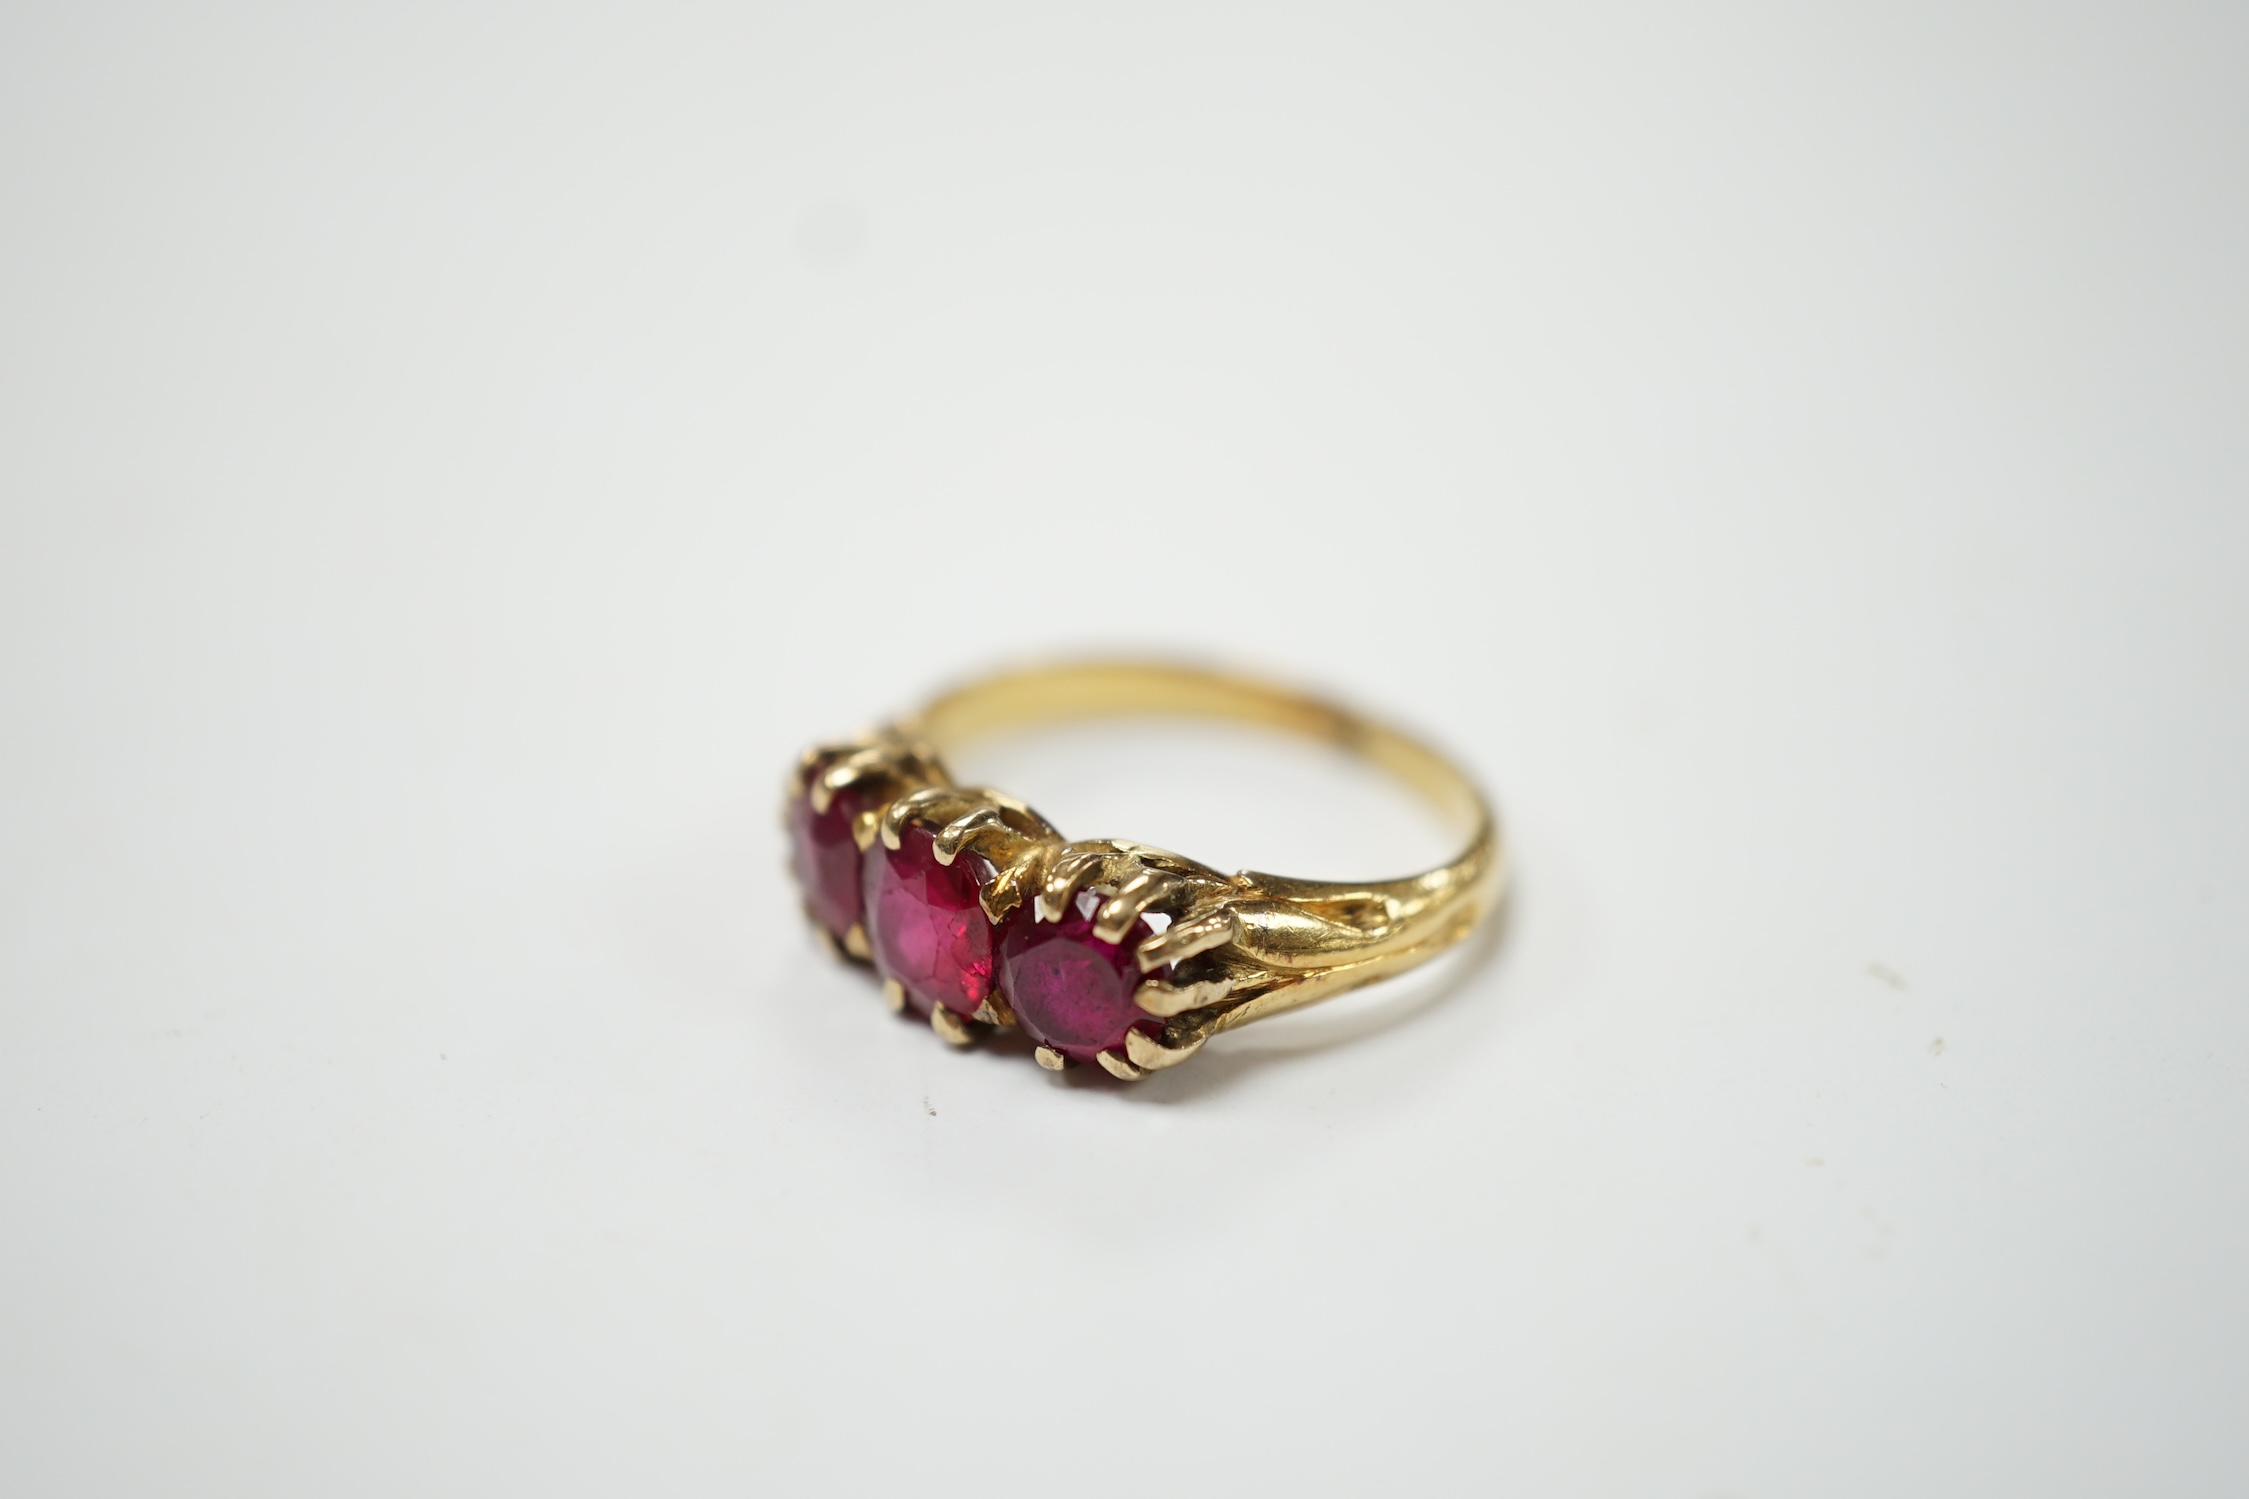 A yellow metal and three stone synthetic ruby set ring, size M, gross weight 4.8 grams. Condition - fair